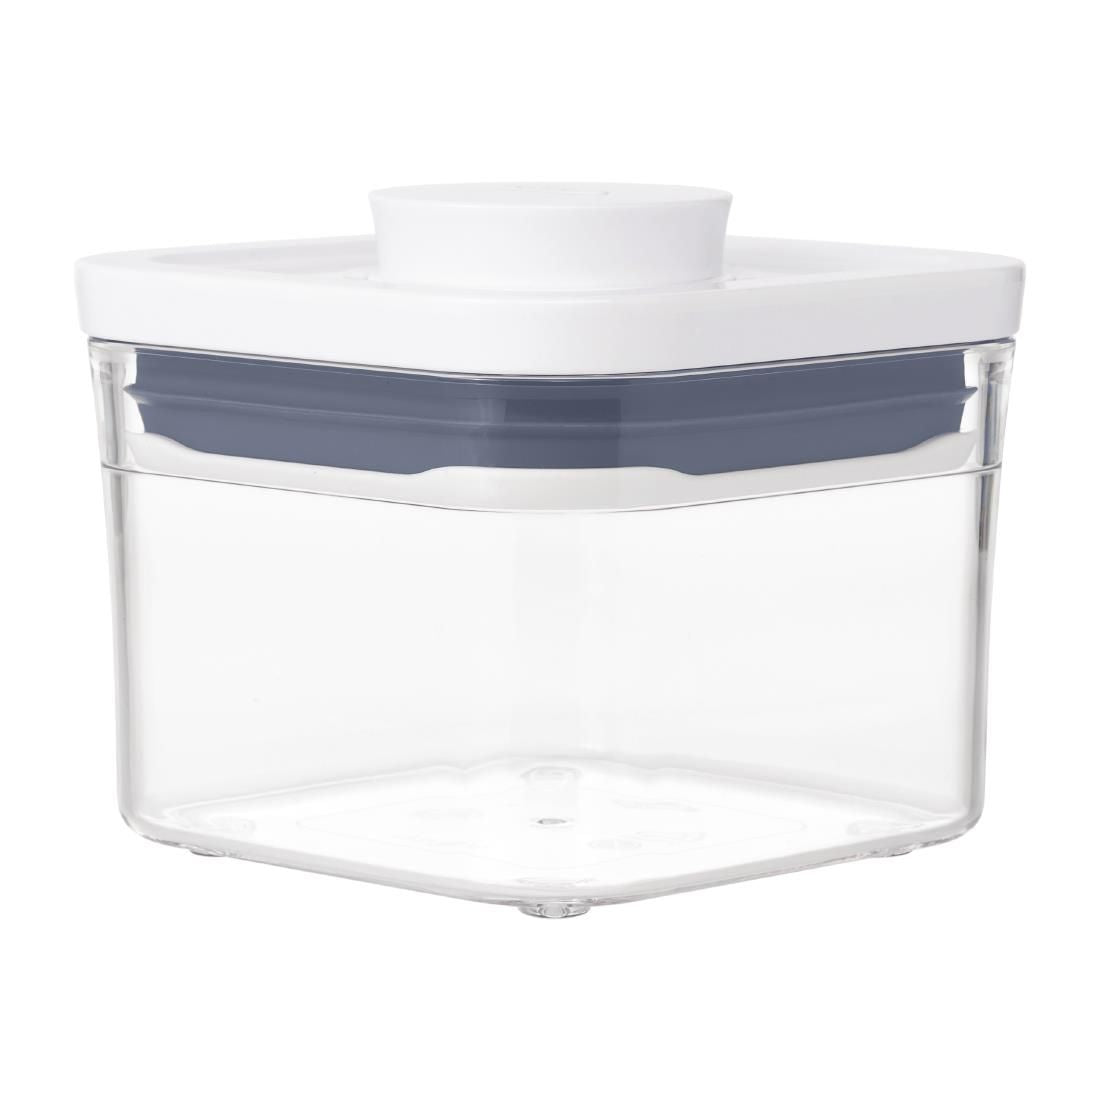 FB090 Oxo Good Grips POP Container Square Small Extra Short JD Catering Equipment Solutions Ltd